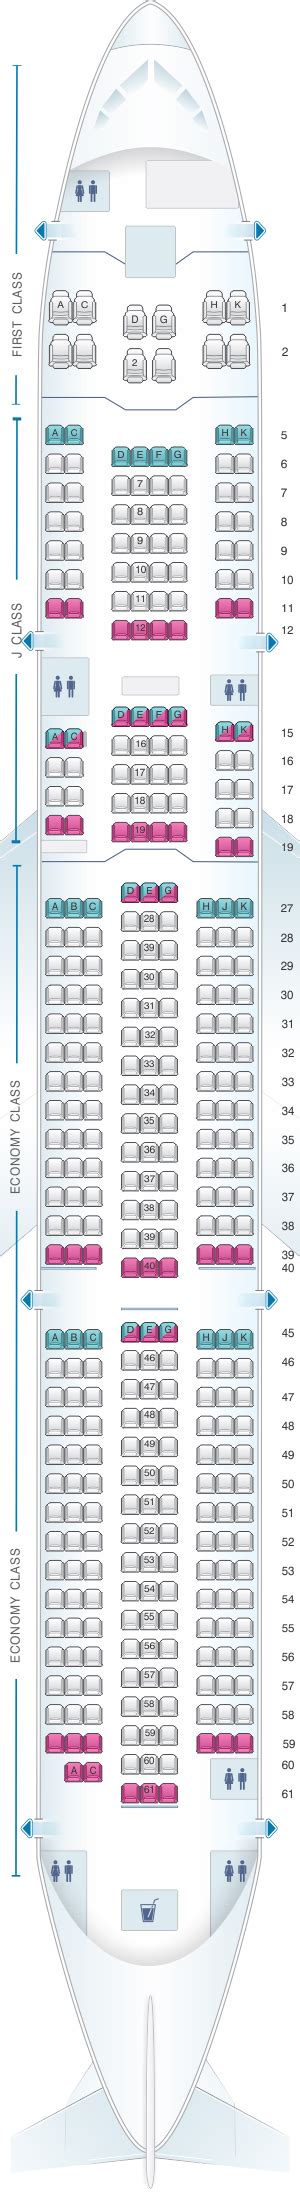 Airbus A350 900 Seating Map Image To U